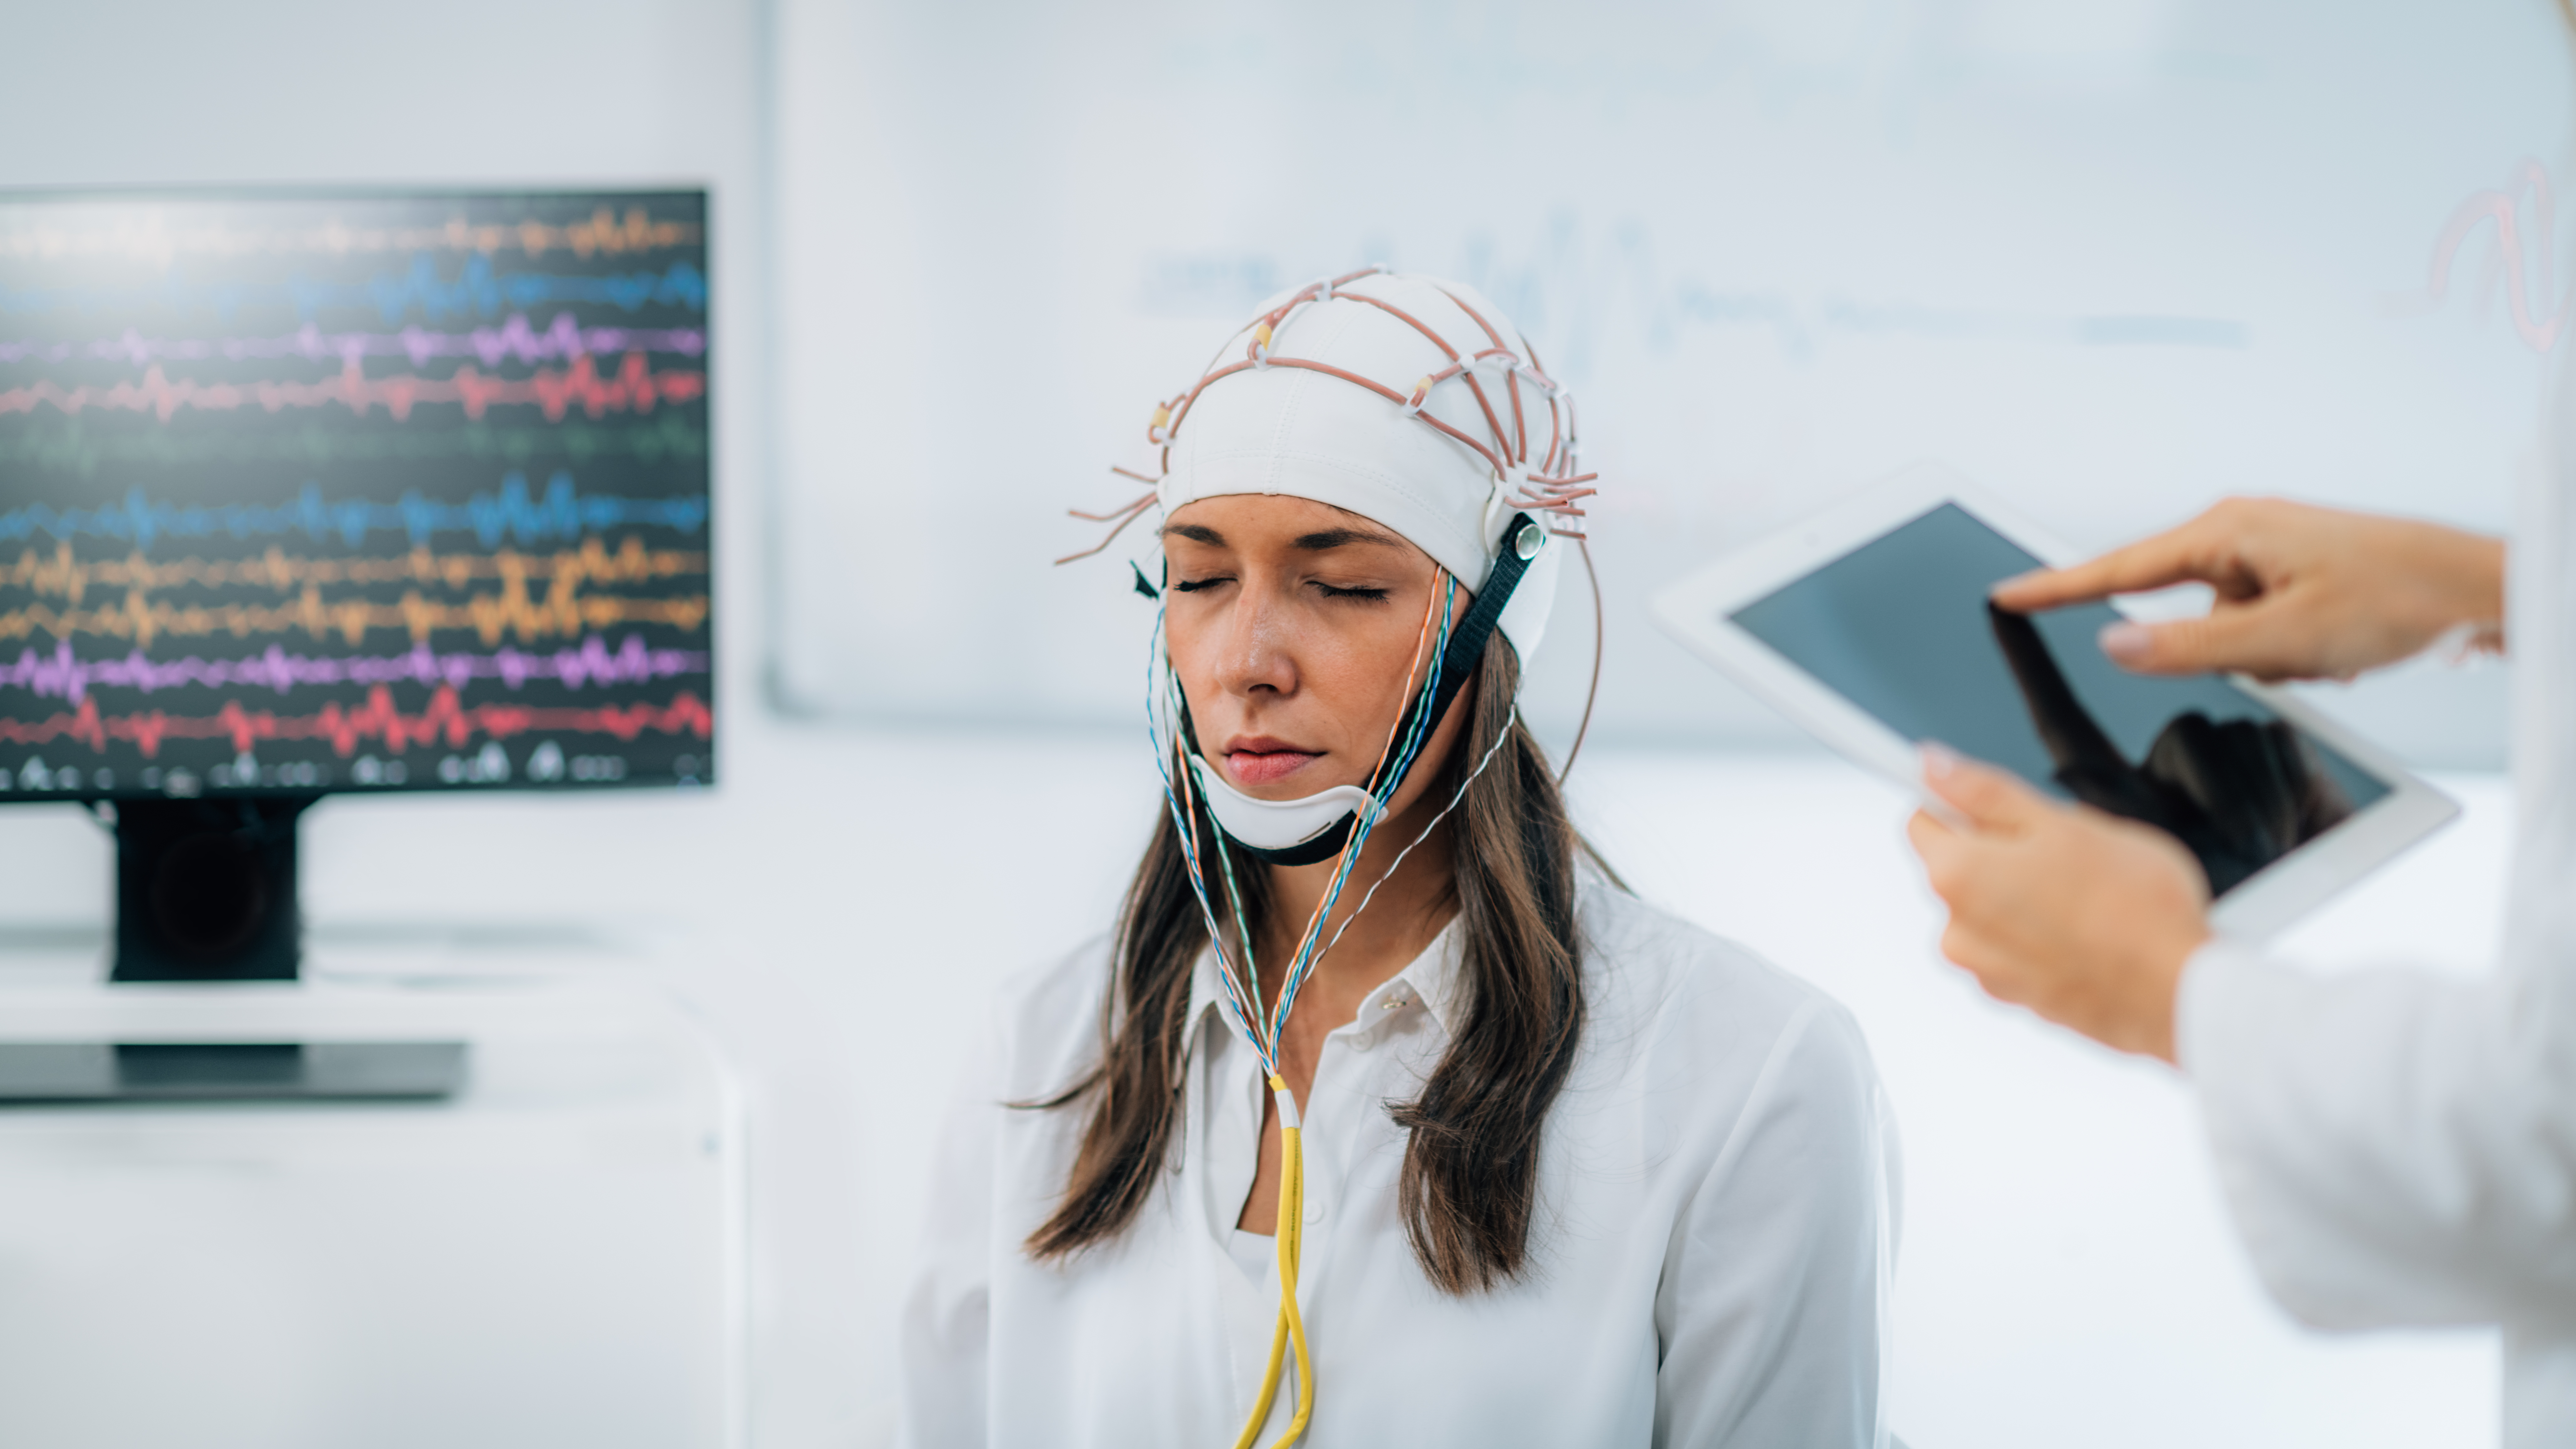 This signal processing algorithm can increase the accuracy of measured beta waves in the brain, increasing the efficacy of deep brain stimulation for Parkinson’s patients. Source: Envato Elements